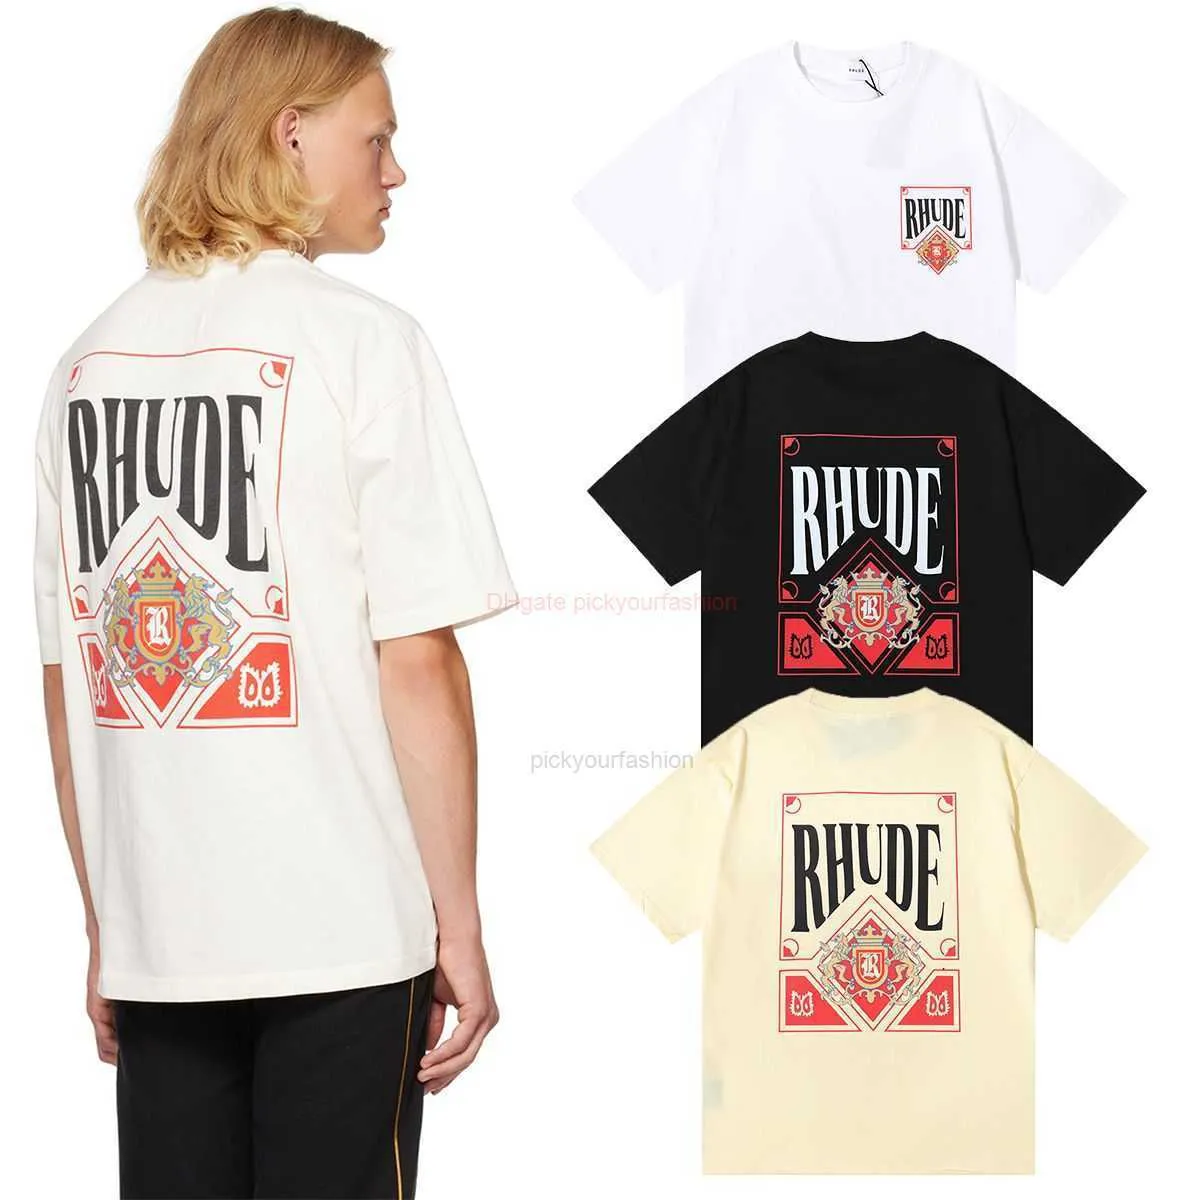 Designer Fashion Clothing Tees Tshirt Rhude Wine Red Card Printing High Quality Double Yarn Pure Cotton Short Sleeve Tshirt for Male Female Students Leisure Cotto